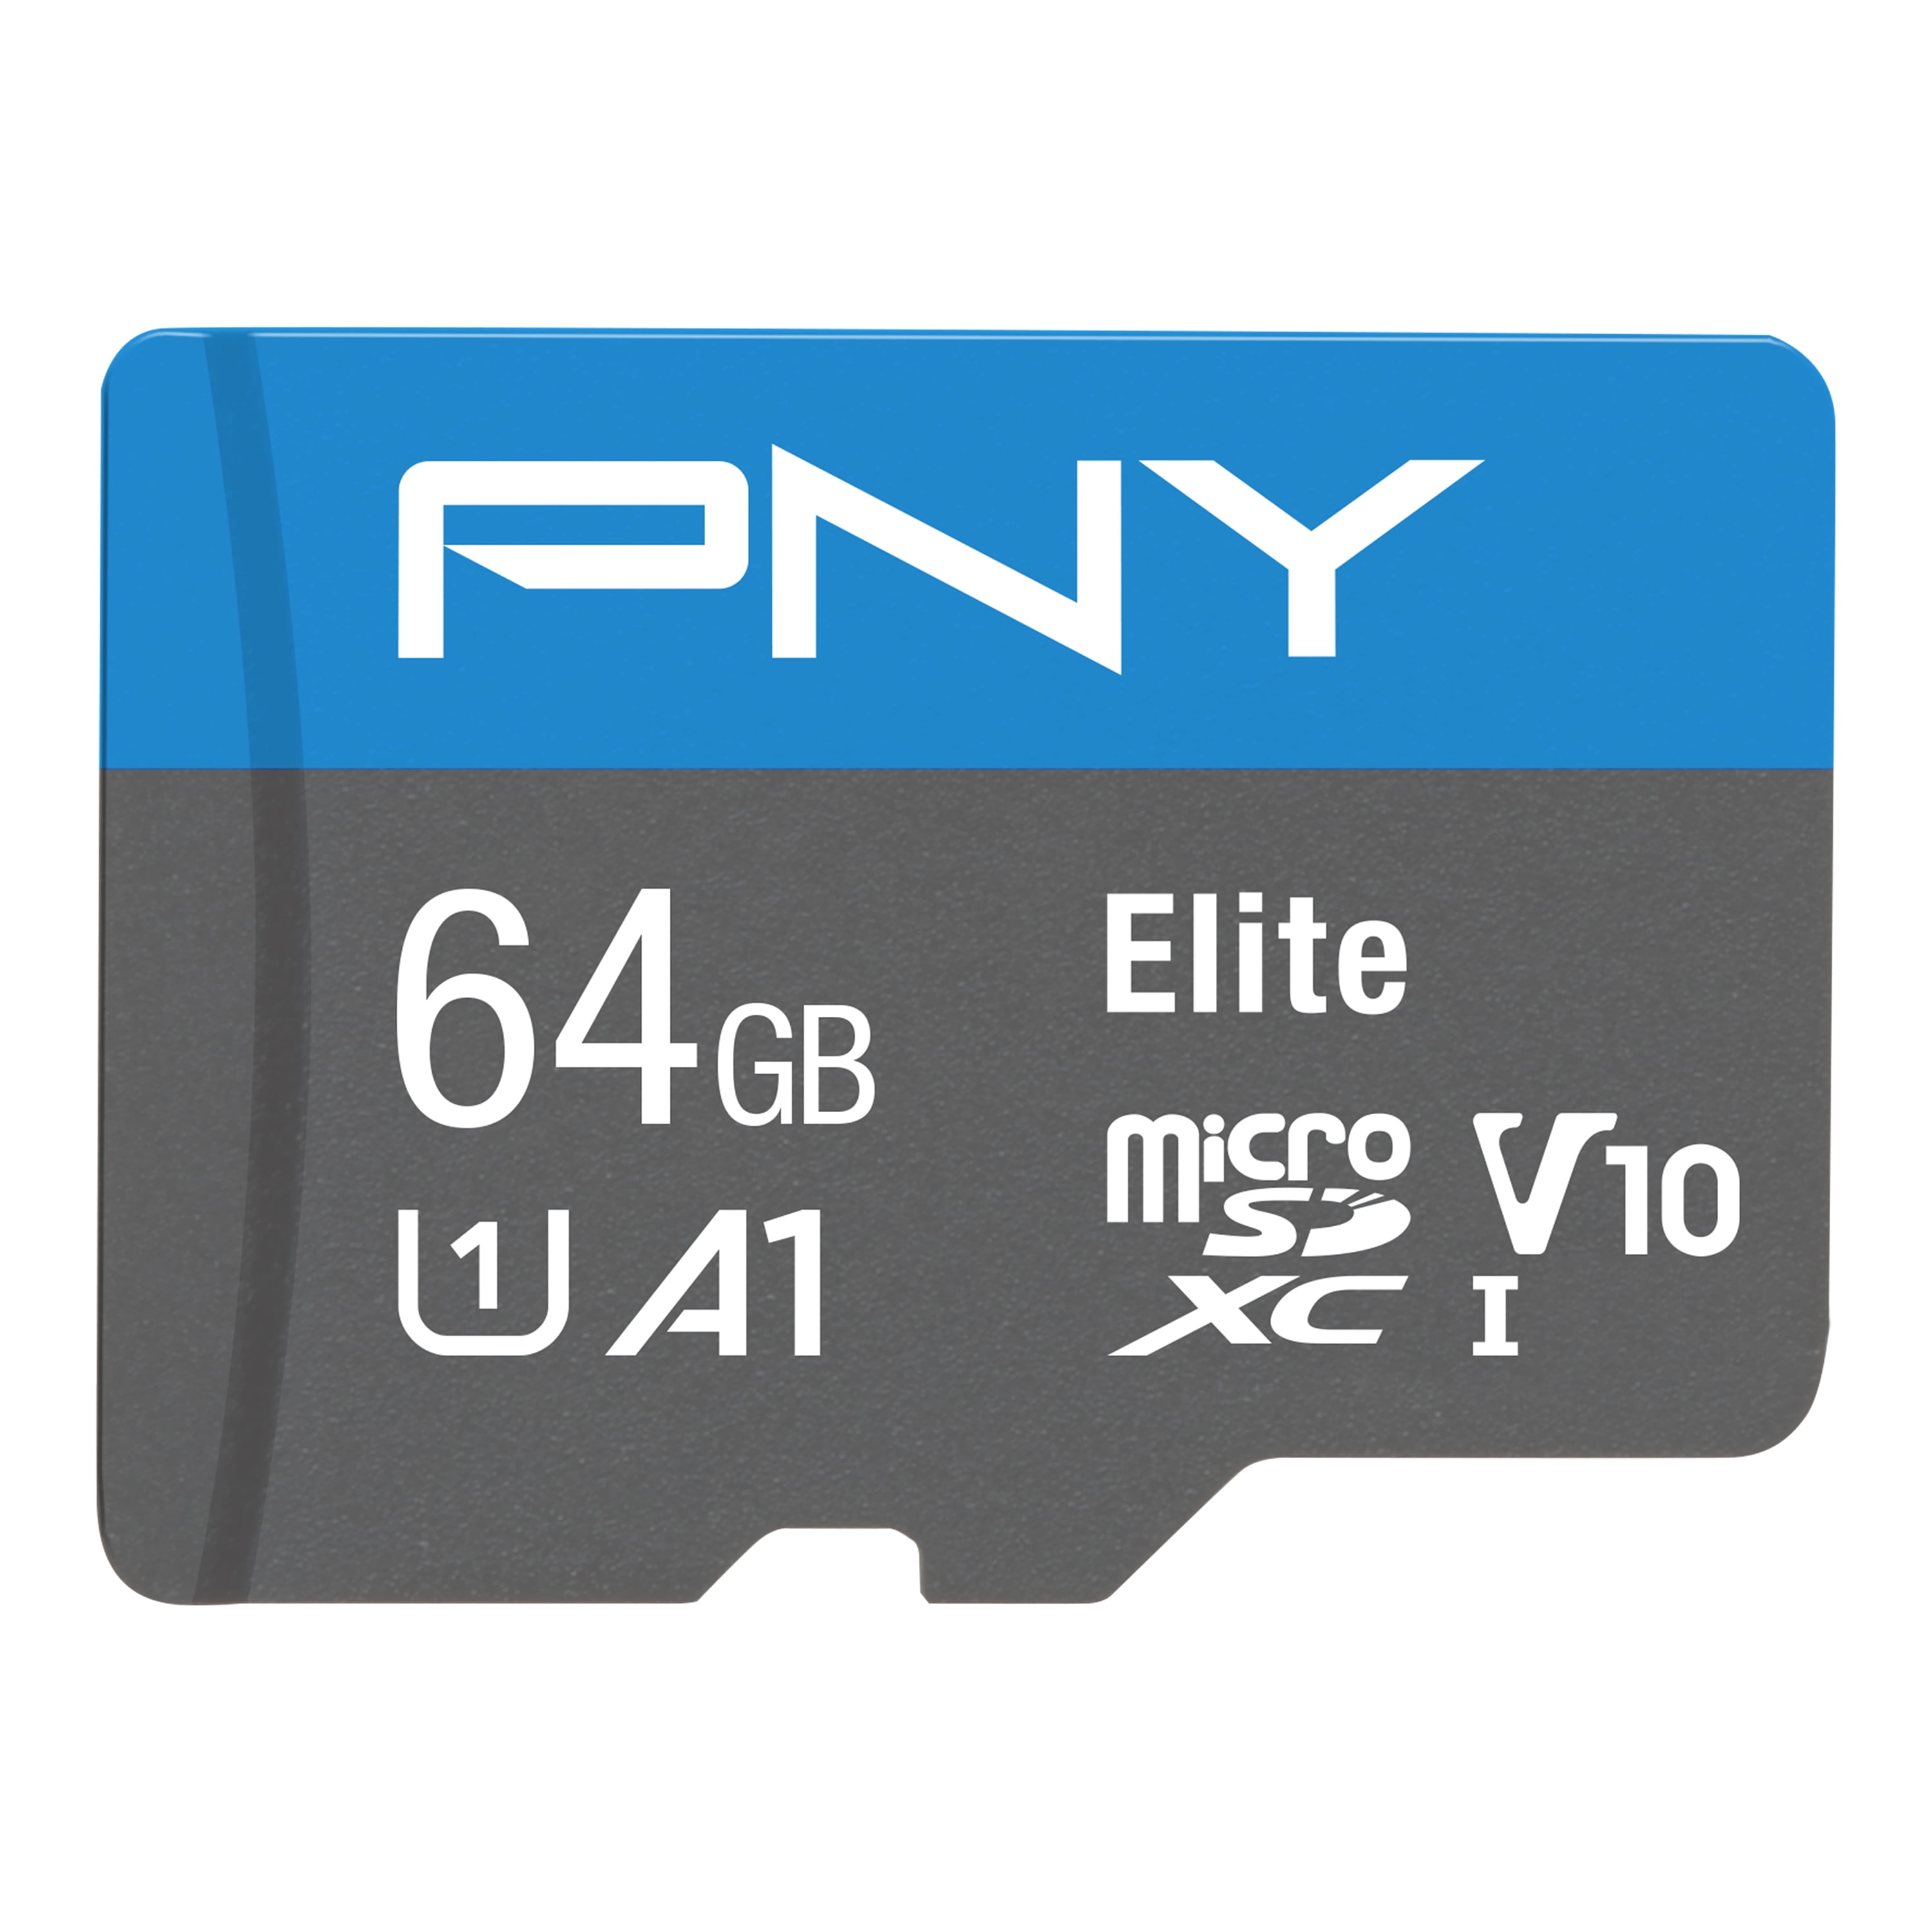 PNY 64GB Elite Class 10 U1 microSDHC Flash Memory Card  for Mobile Devices - 100MB/s, Class 10, U1, V10, A1, Full HD, UHS-I, micro SD